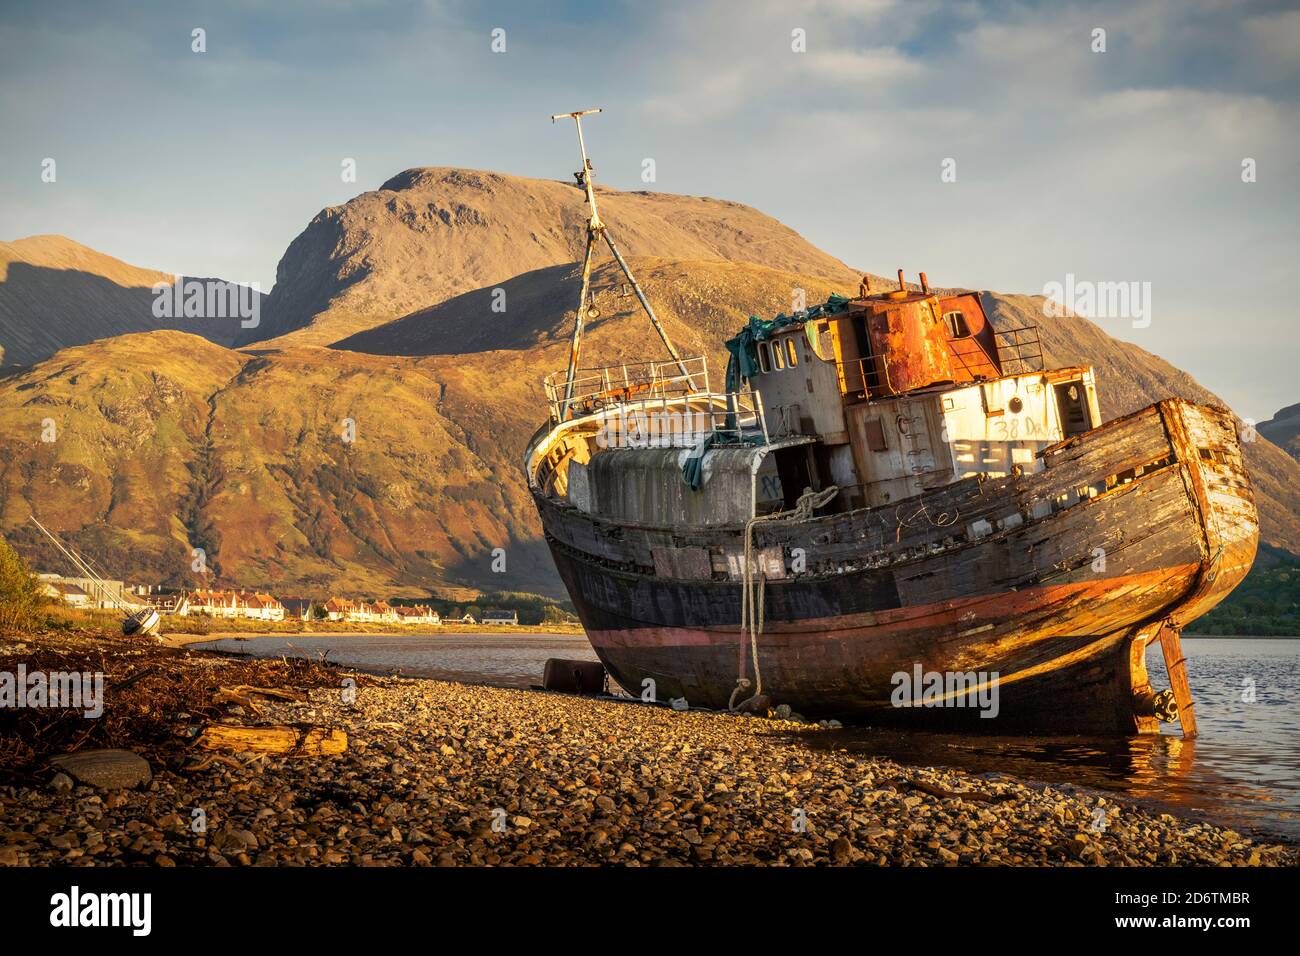 The Corpach Wreck, at Caol, in the shadow of an unusually cloud-free Ben Nevis. Stock Photo